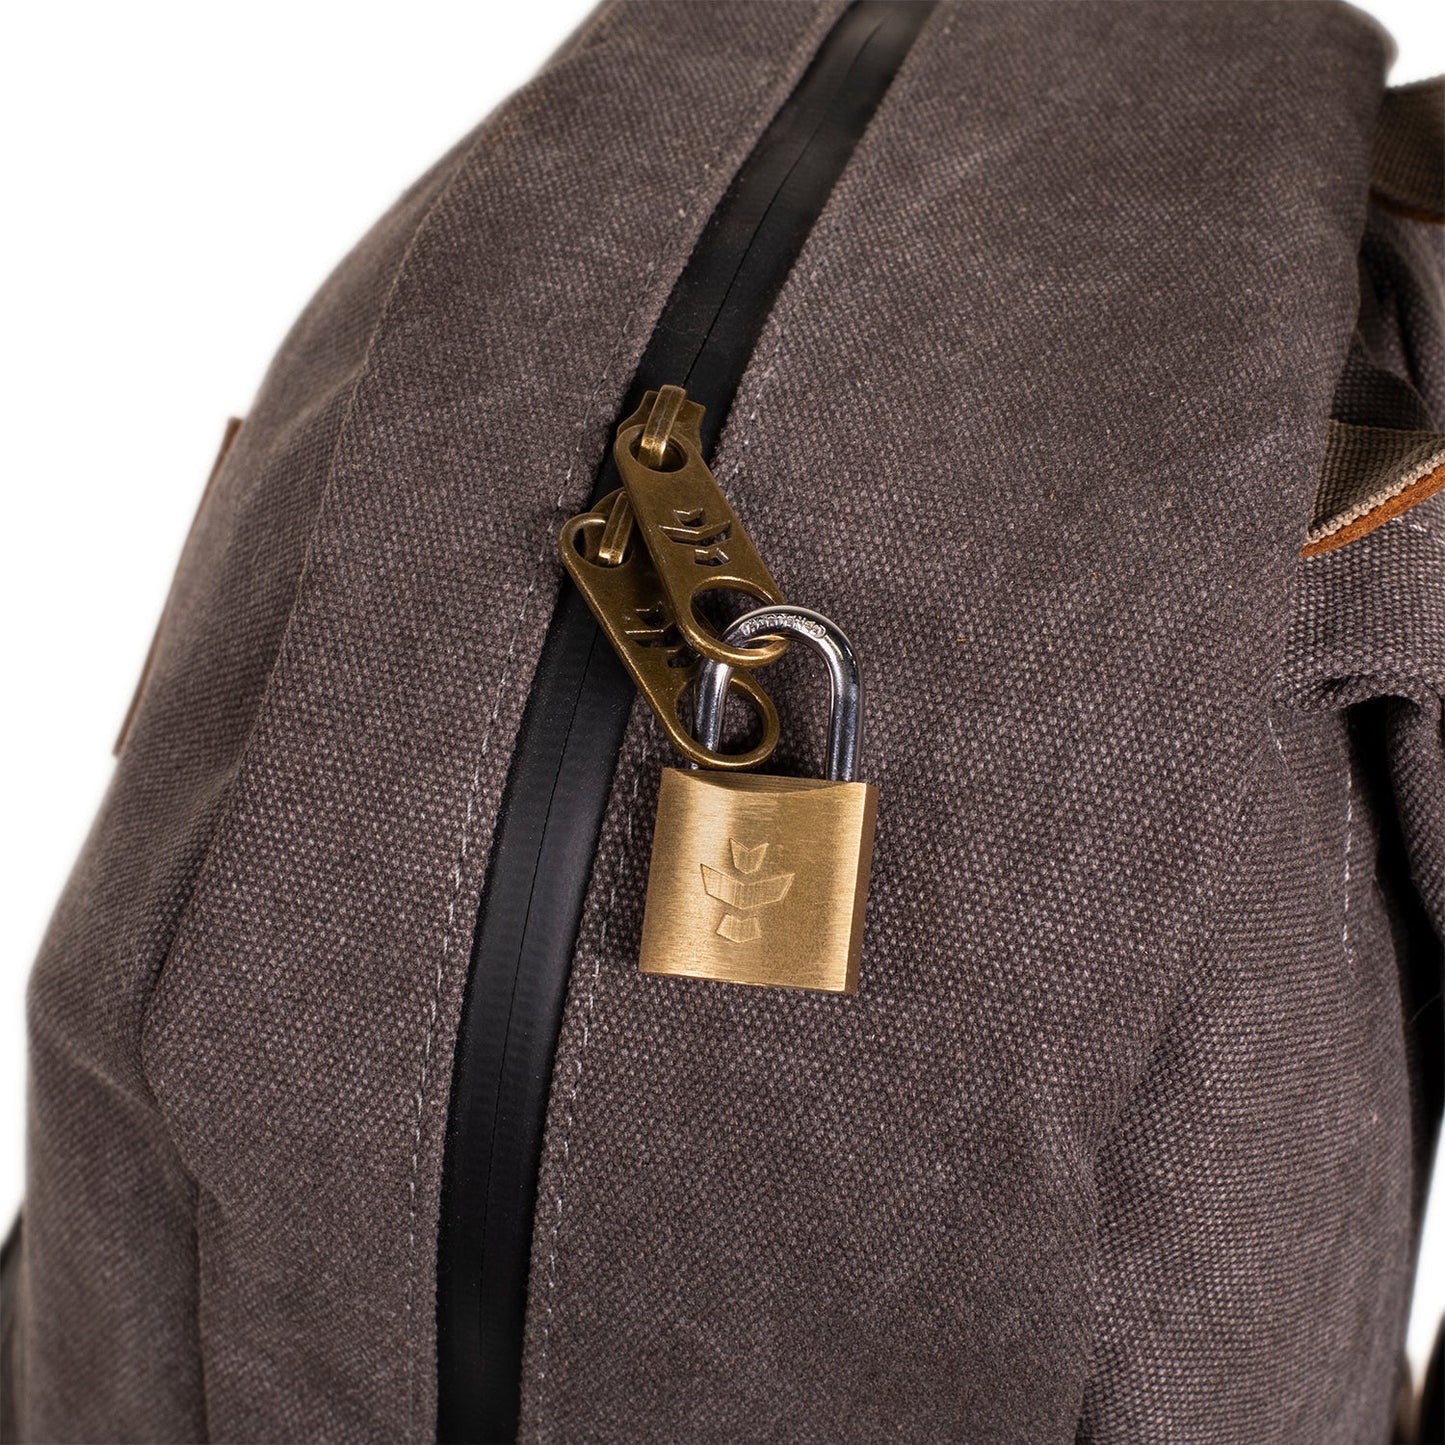 The Explorer - Smell Proof Backpack